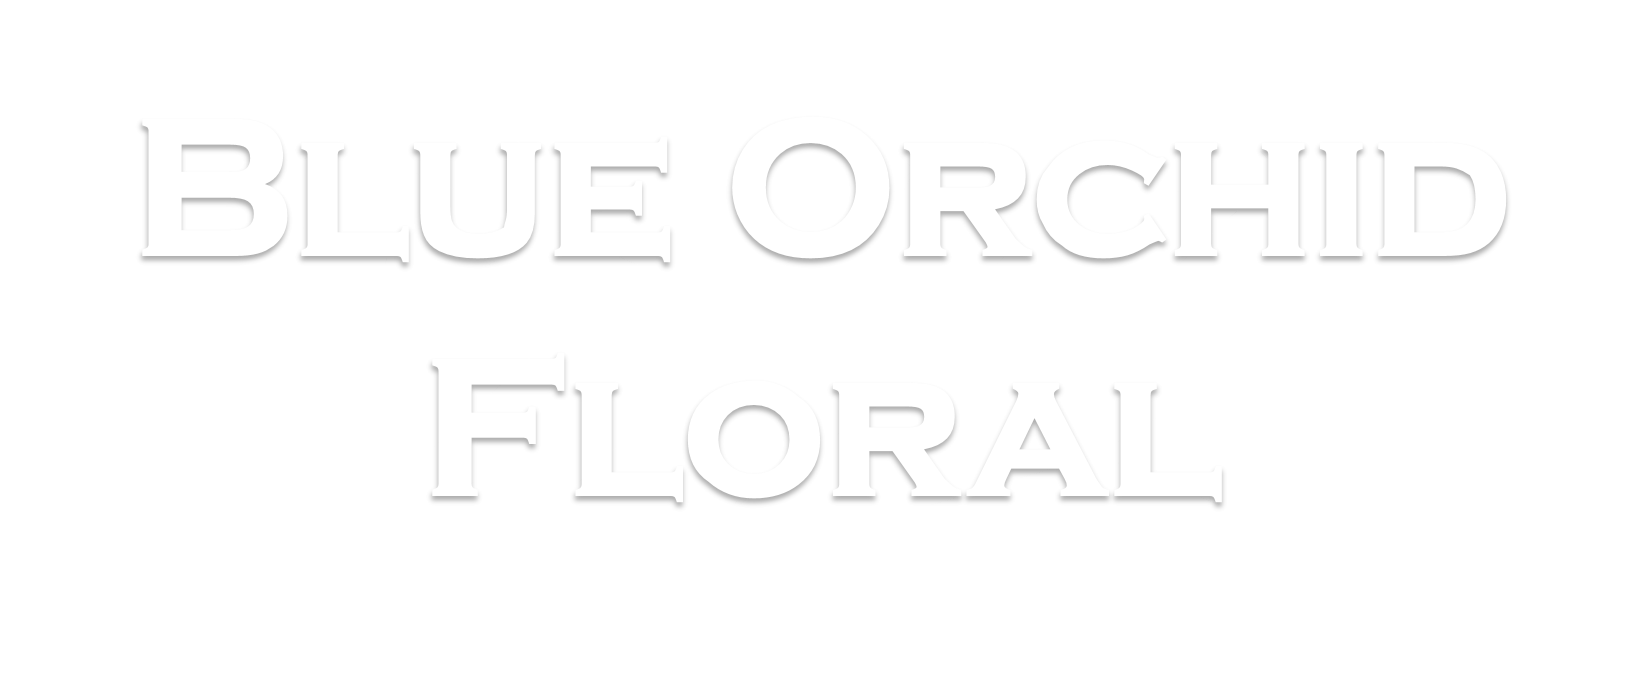 Blue Orchid Floral - Greensburg, PA 15601 - (724)834-2001 | ShowMeLocal.com